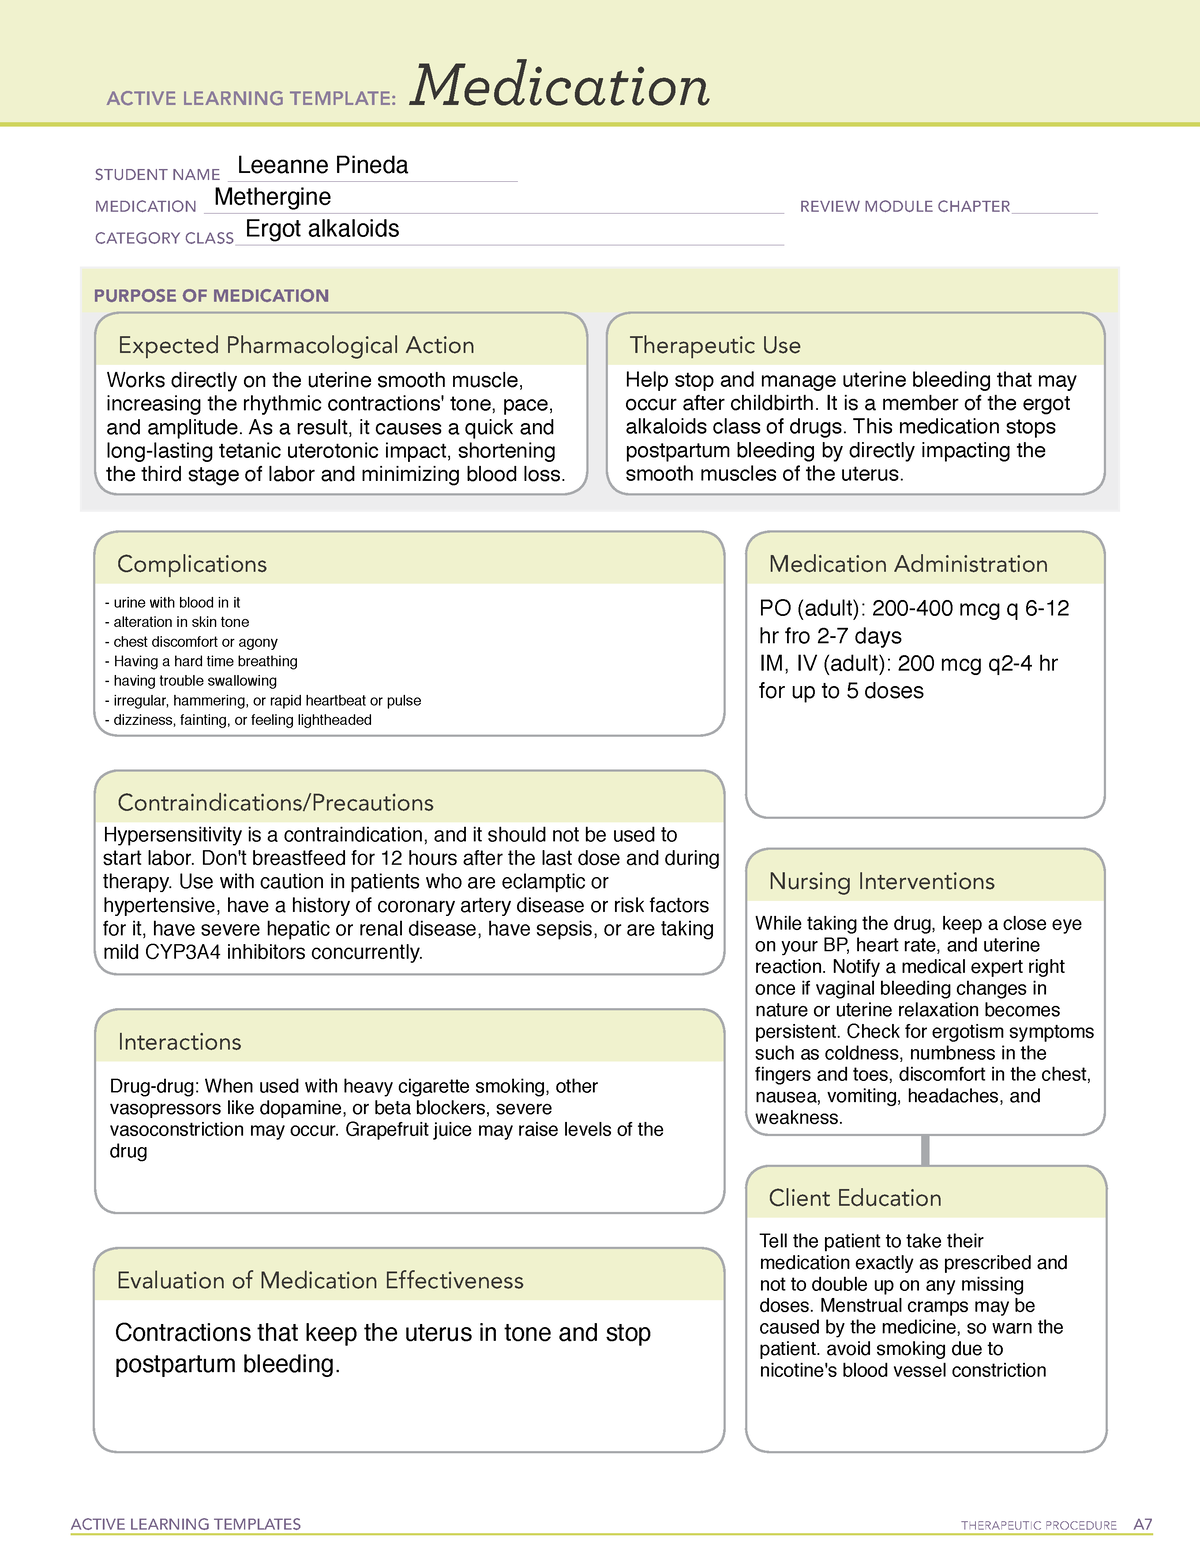 Methergine ATI LEARNING TEMPLATE ACTIVE LEARNING TEMPLATES